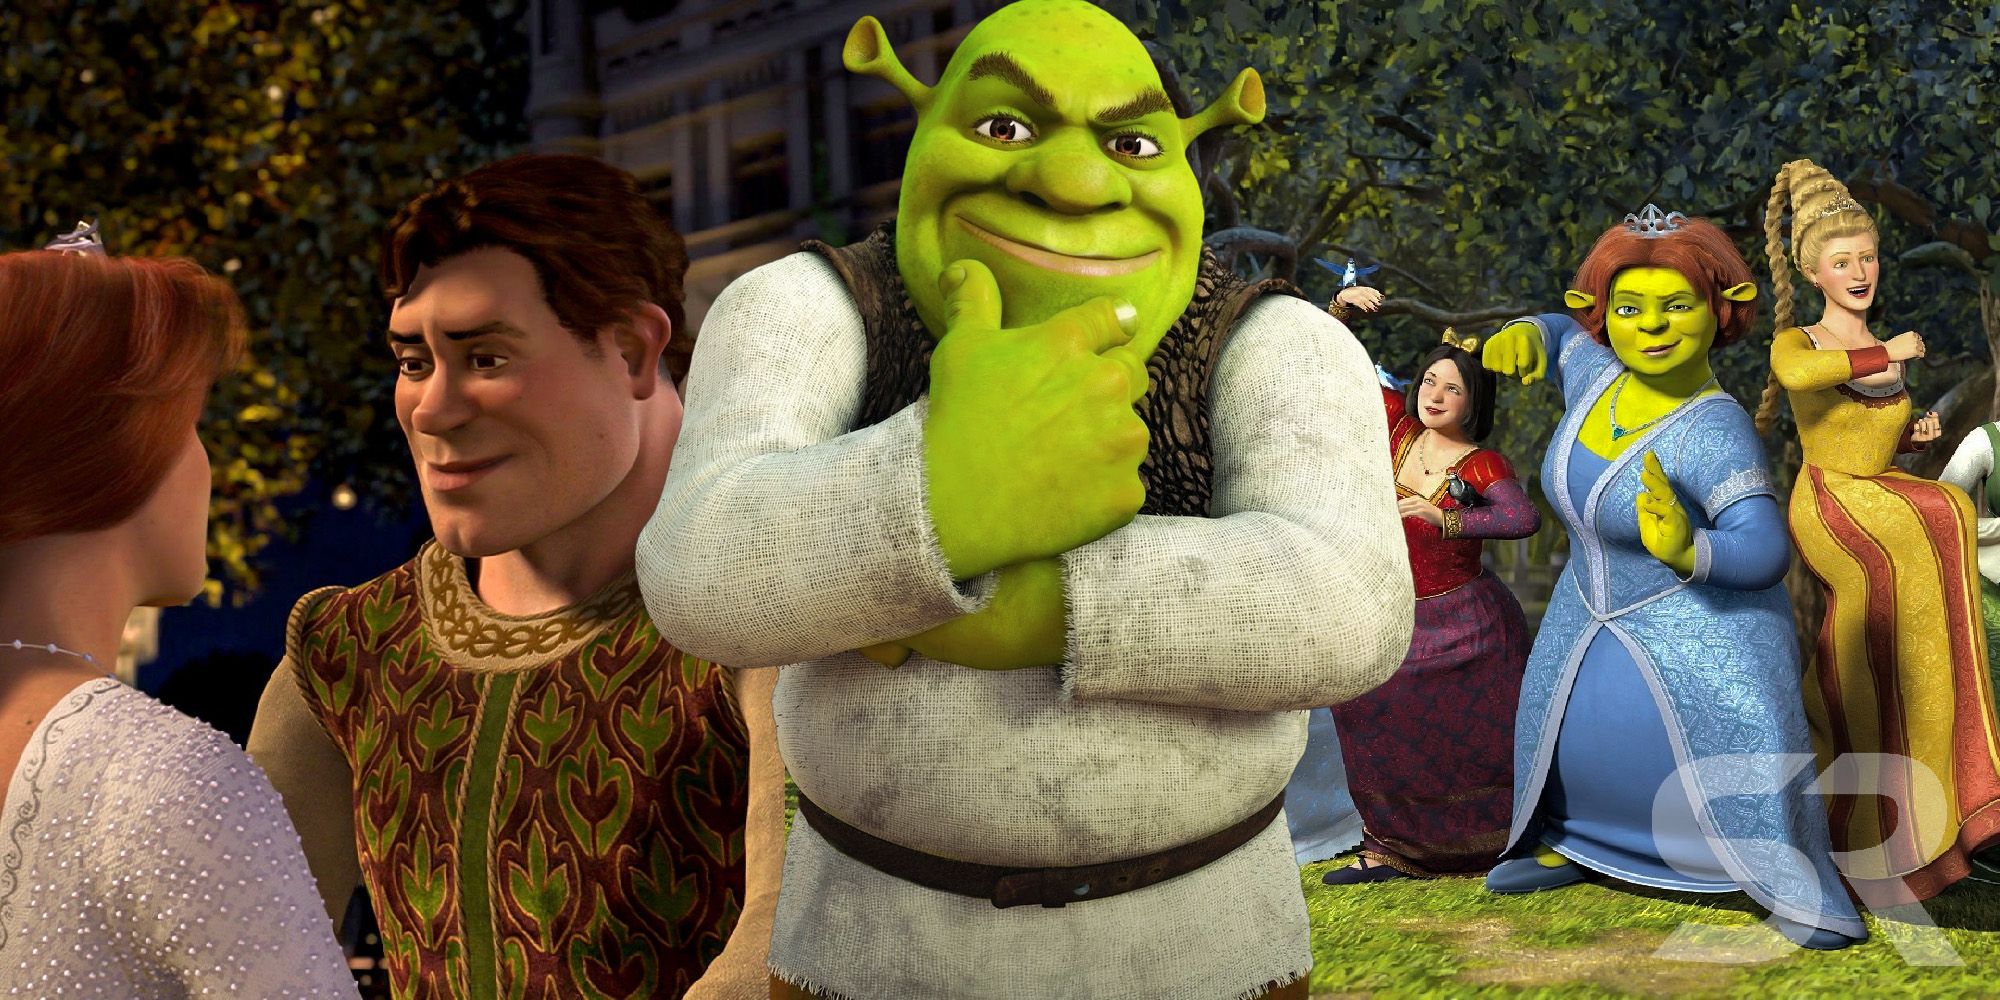 Shrek 5: Everything We Know About The Movie So Far